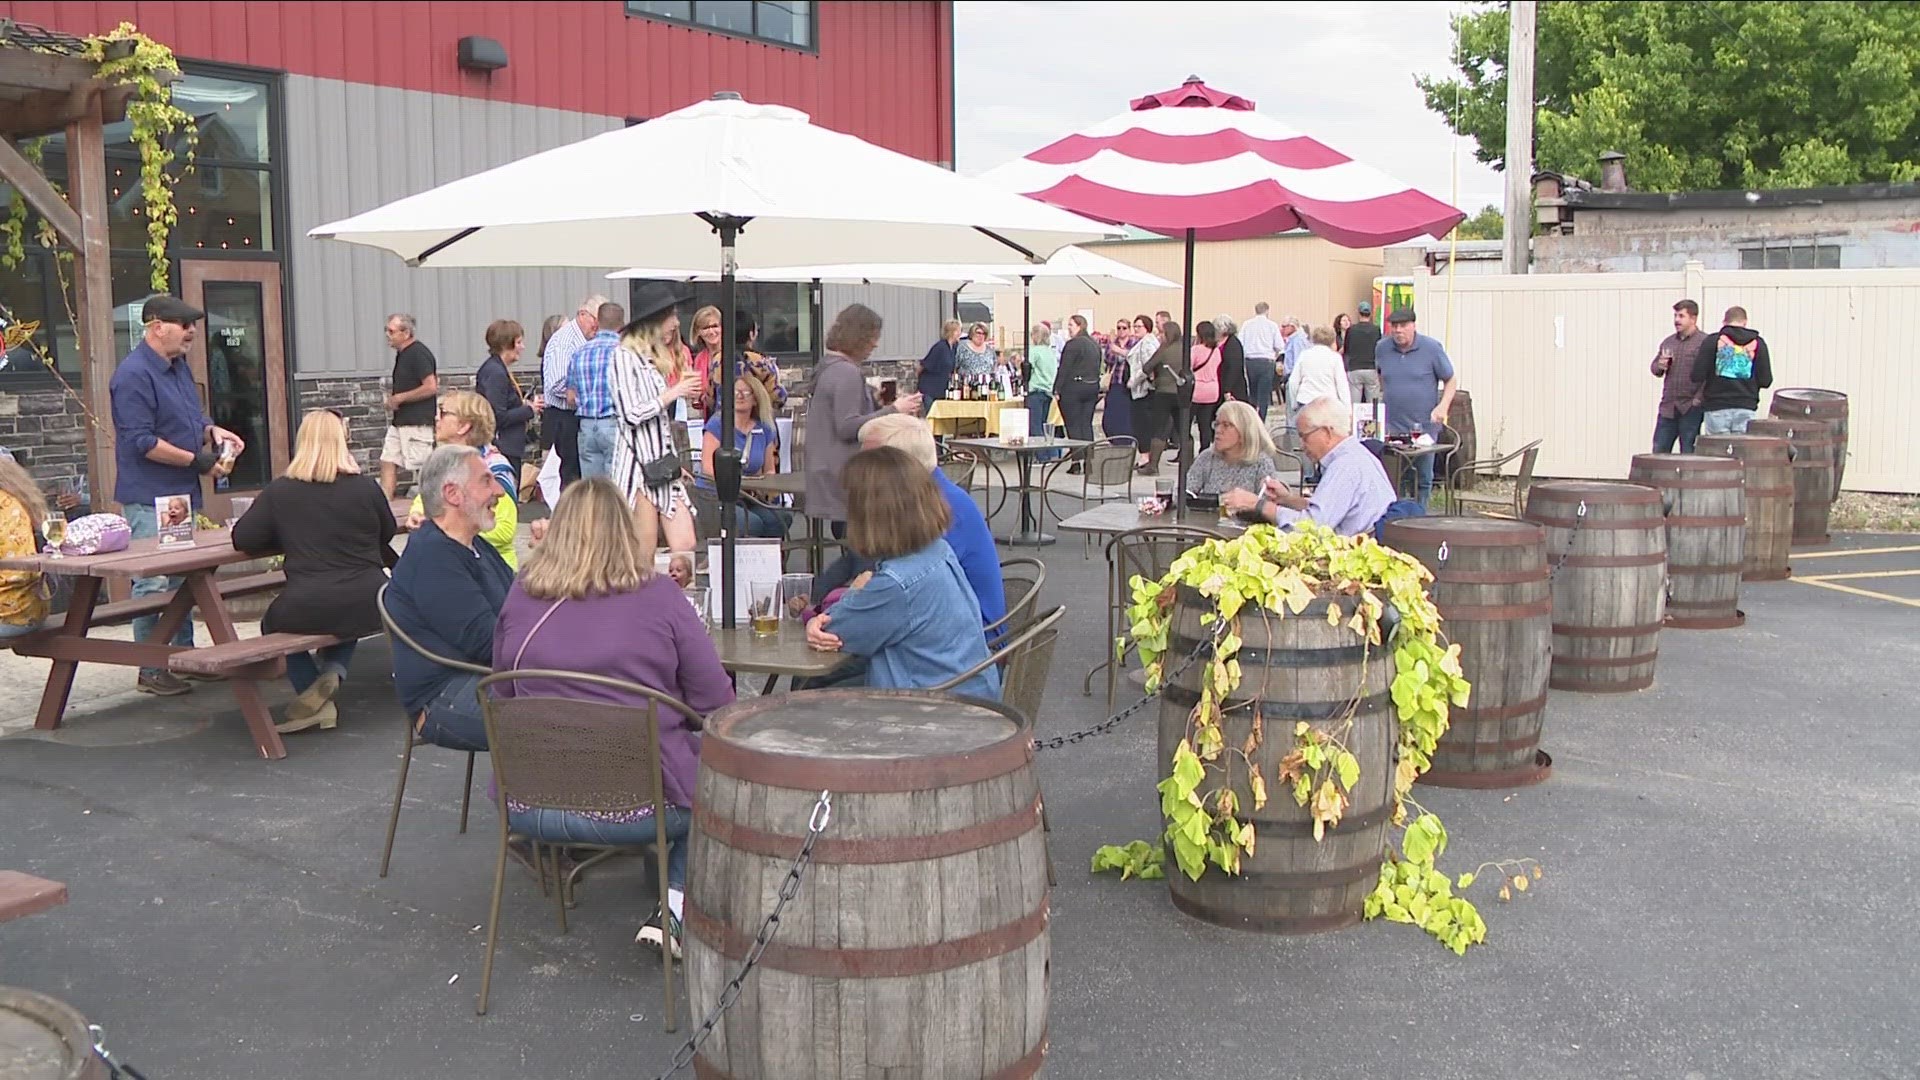 Held at the Flying Bison Brewery, the event is an important fundraiser for Family Promise of WNY.